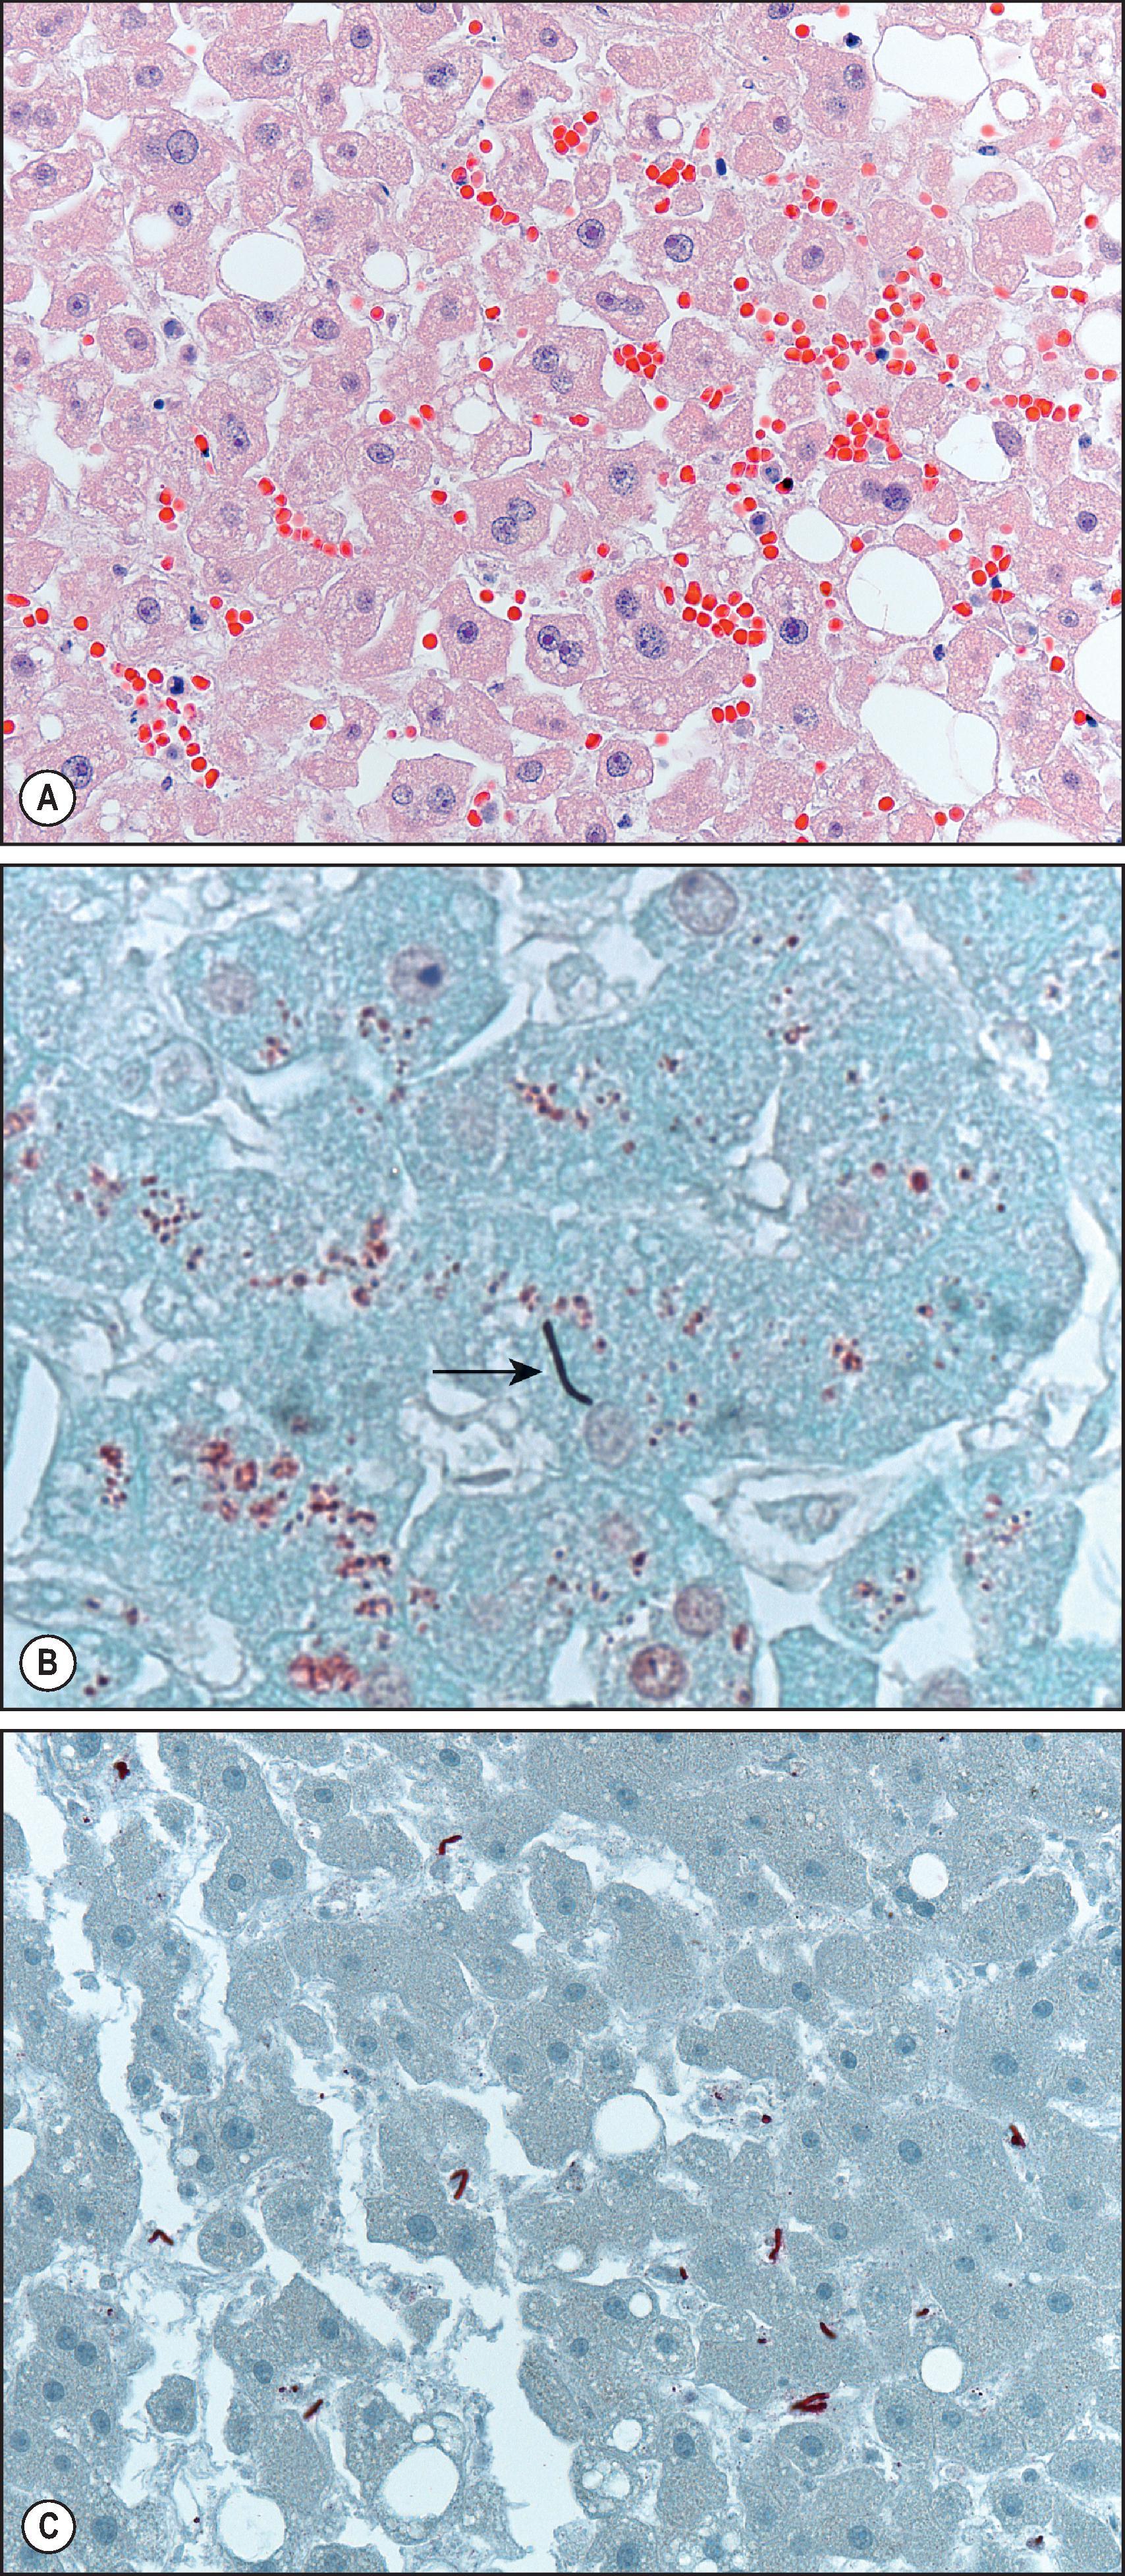 Figure 7.26, Bacillus anthracis (anthrax). (A) Low-power photomicrograph of liver in a fatal case of inhalational anthrax with secondary septicaemia. Note focal degeneration and necrosis of hepatocytes and haemorrhage and lack of inflammatory response. (H&E stain.) (B) Single Gram-positive bacillus is seen in this photomicrograph (arrow). (C) Immunohistochemical assay for B. anthracis cell wall showing multiple bacilli in hepatic sinusoids.